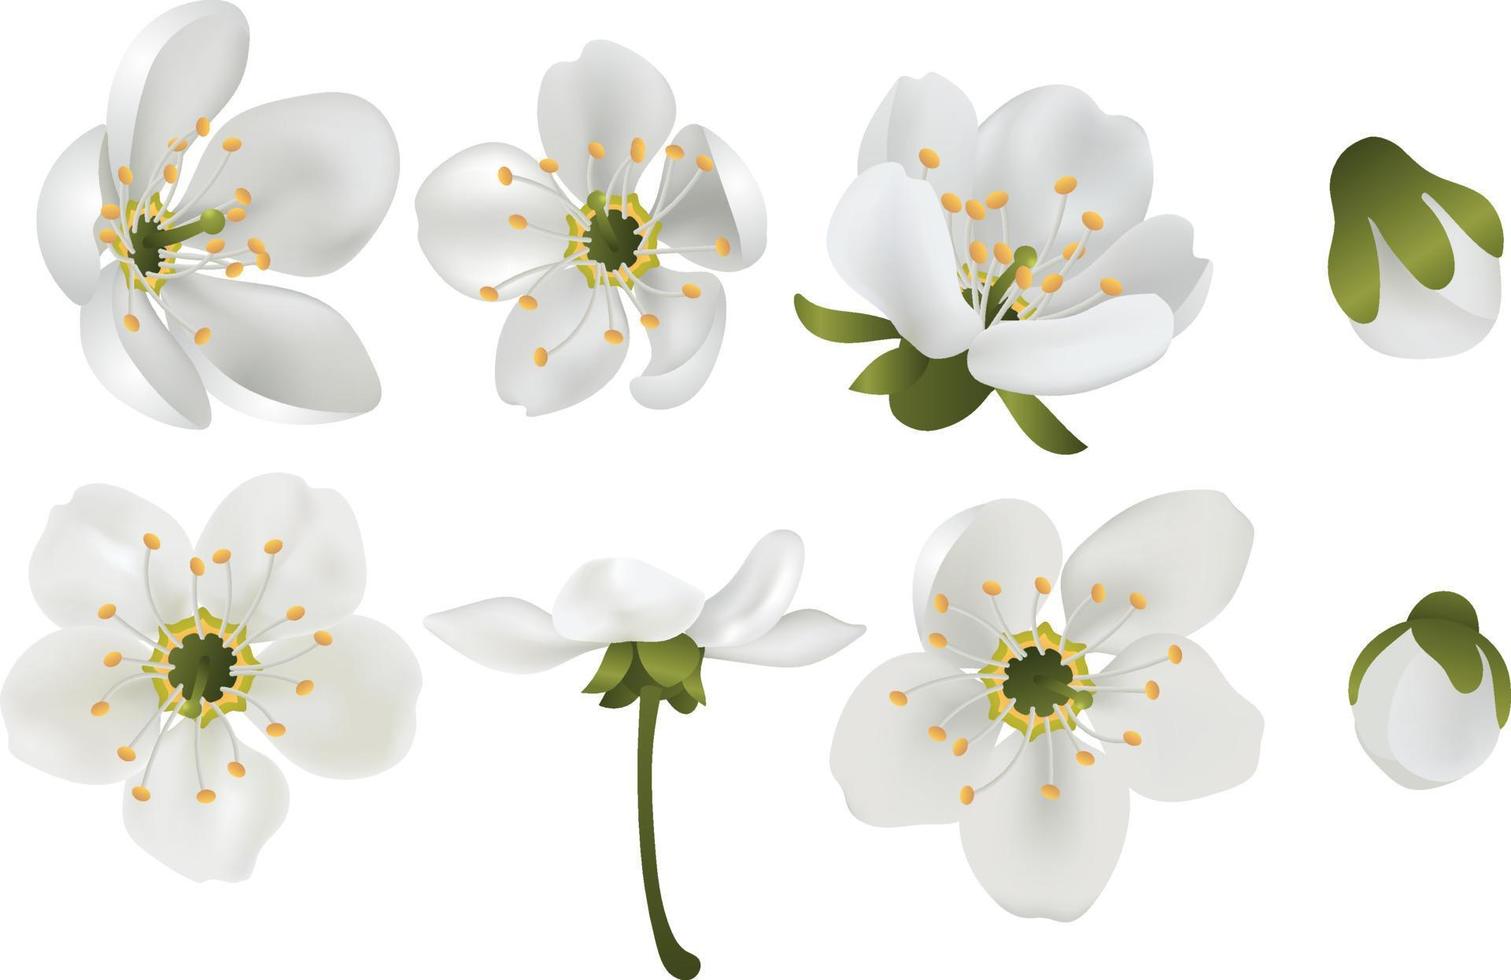 Realistic white cherry blossom Spring blooming flowers, petals vector set for your own design.